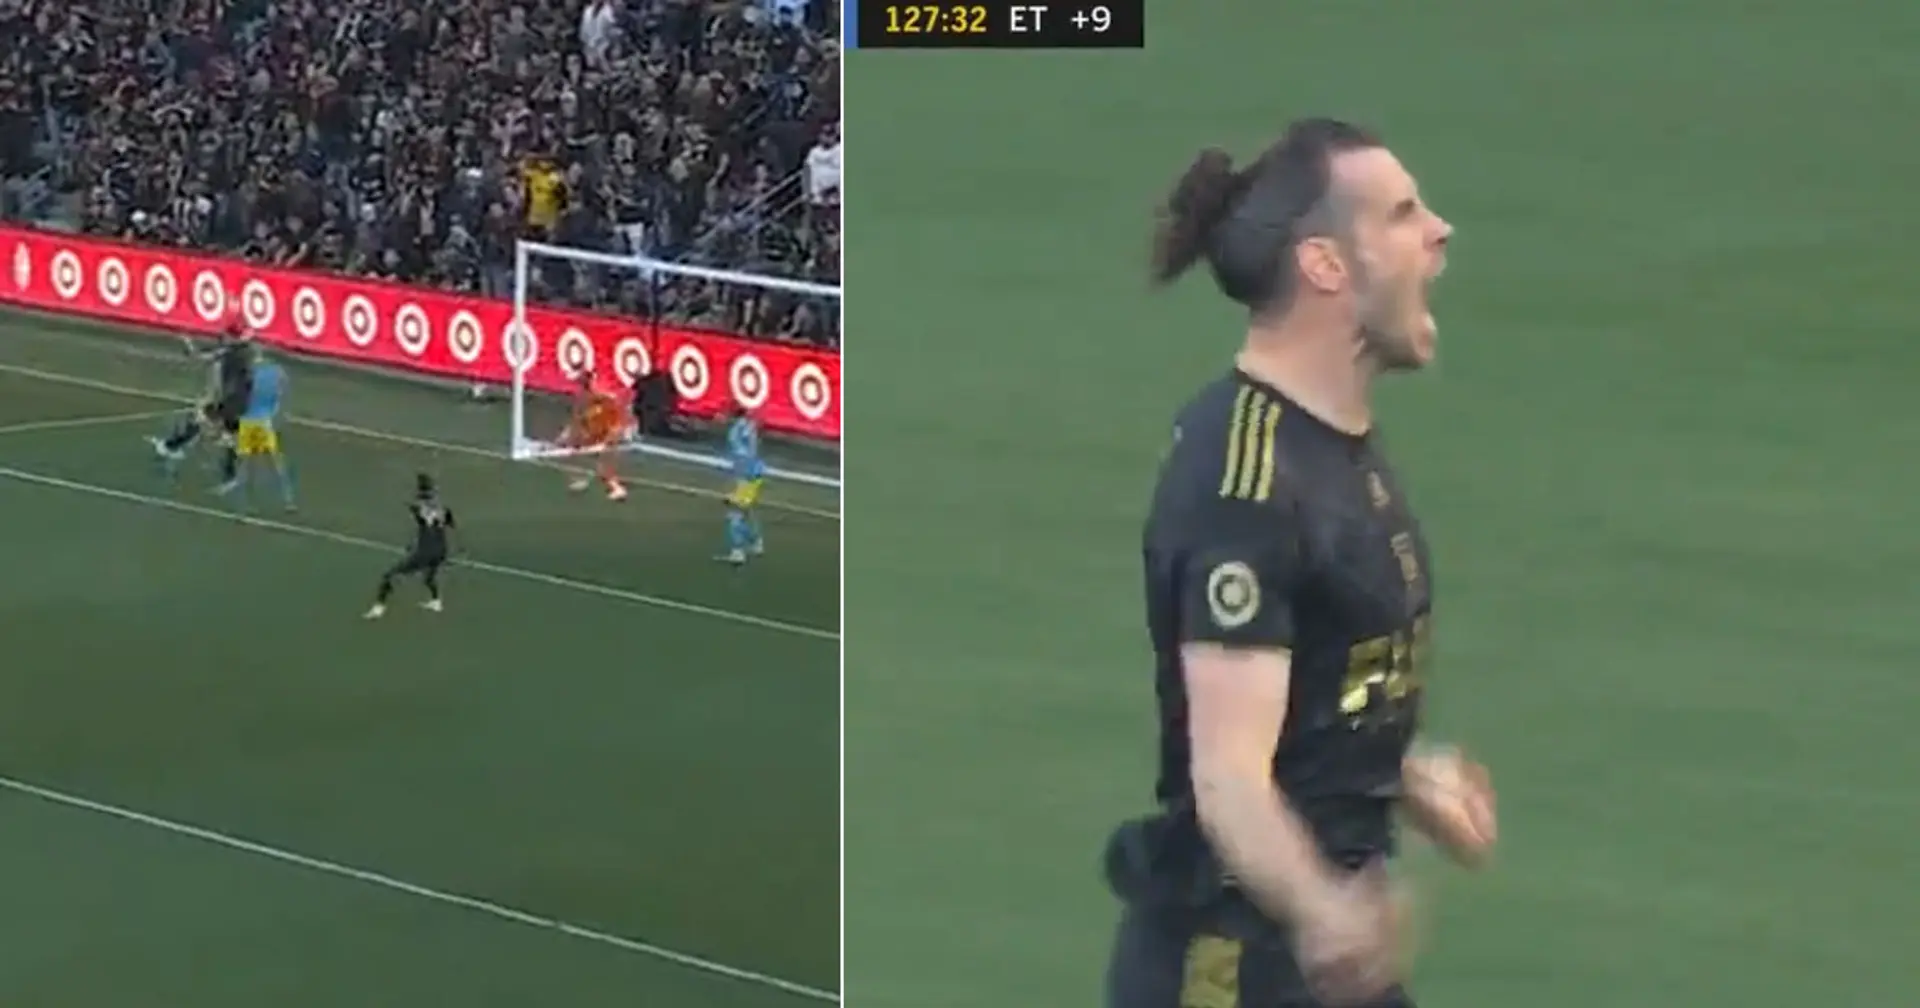 Amazing scenes as Bale scores last-minute equalizer in final, leads Los Angeles to first league title